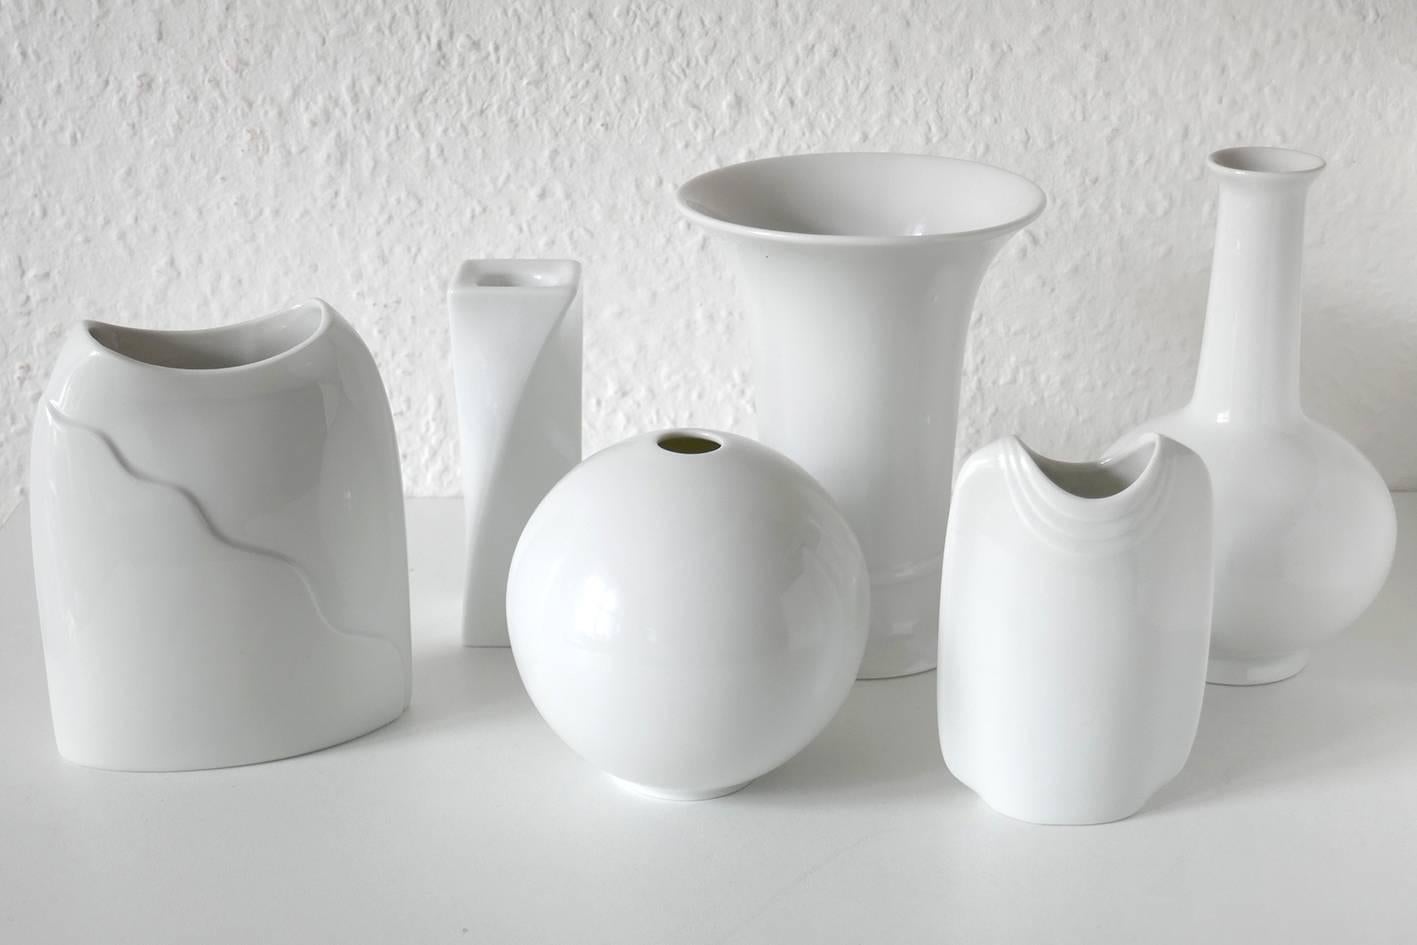 Set of six beautiful midcentury white porcelain vases and candleholder by M. Fray for Kaiser.
Germany, 1960s-1970s
1. Height 5.3